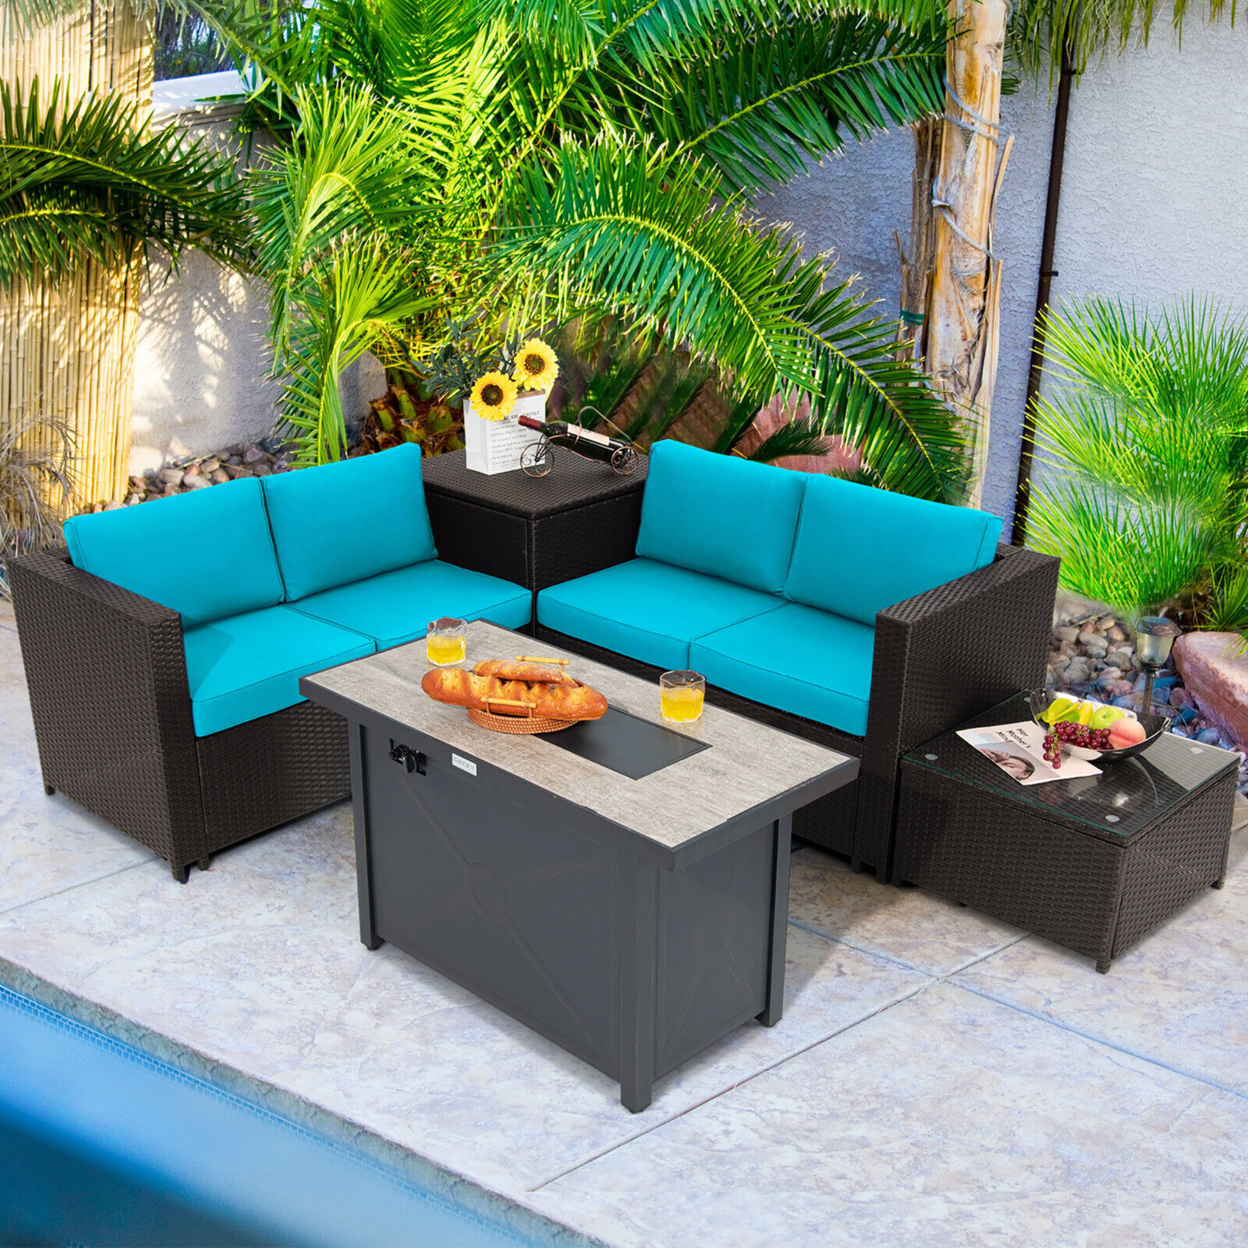 5PCS Patio Rattan Furniture Set Fire Pit Table W/ Cover Storage Cushion - Turquoise